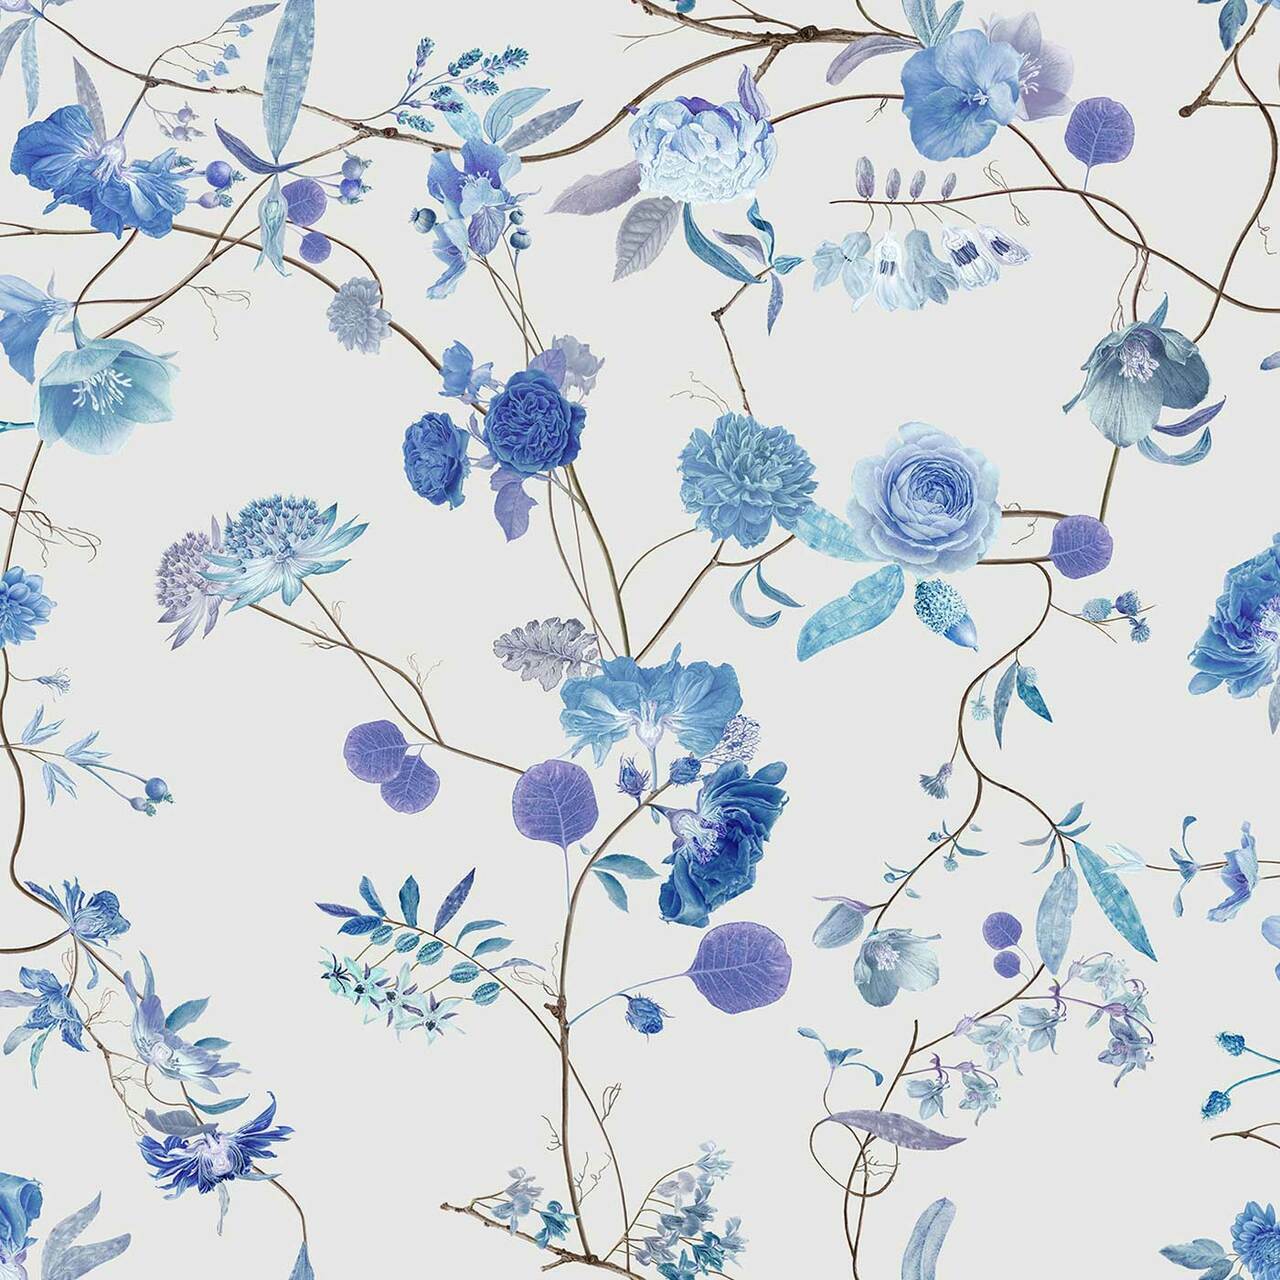 Blue Flower with Leaves Pattern  Botanical Wallpaper for Home Decor  Living Room Bedroom Self Adhesive